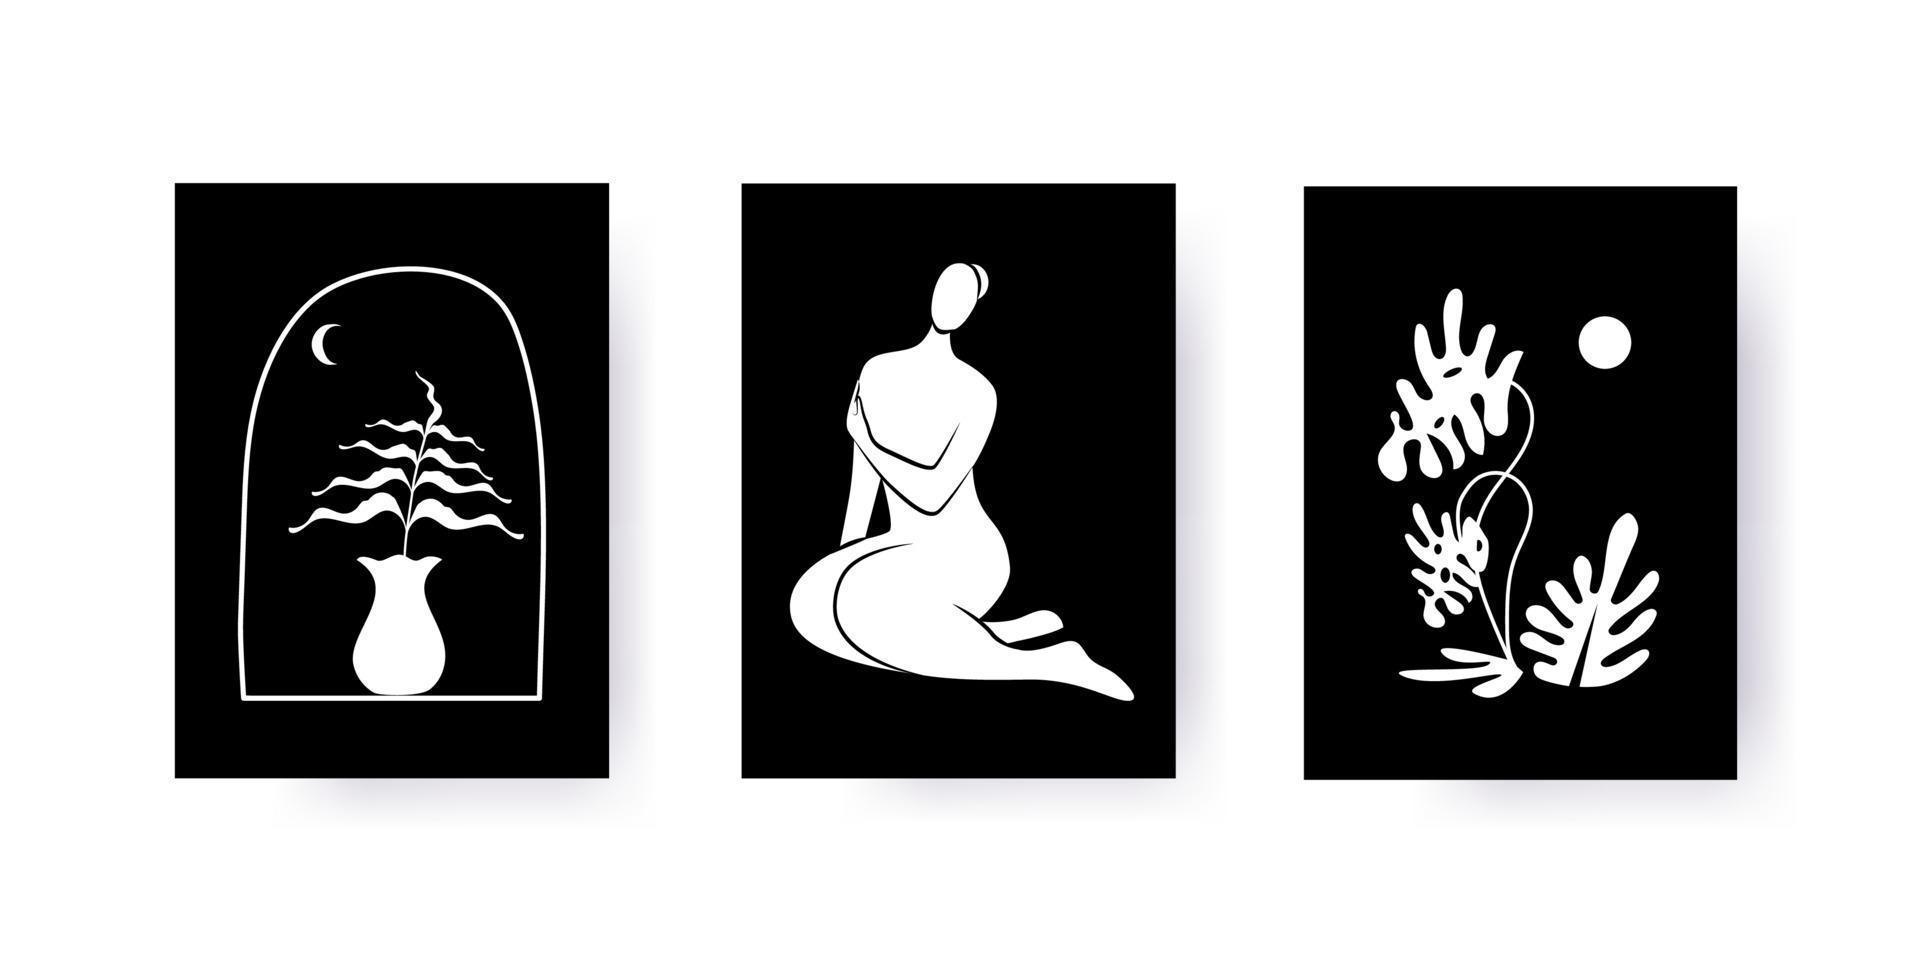 Set of abstract creative posters in black and white color. Matisse style. Triptych. Plants, vase, female body. Design for wall decor, cover, wallpaper, print, card. Vector illustration.